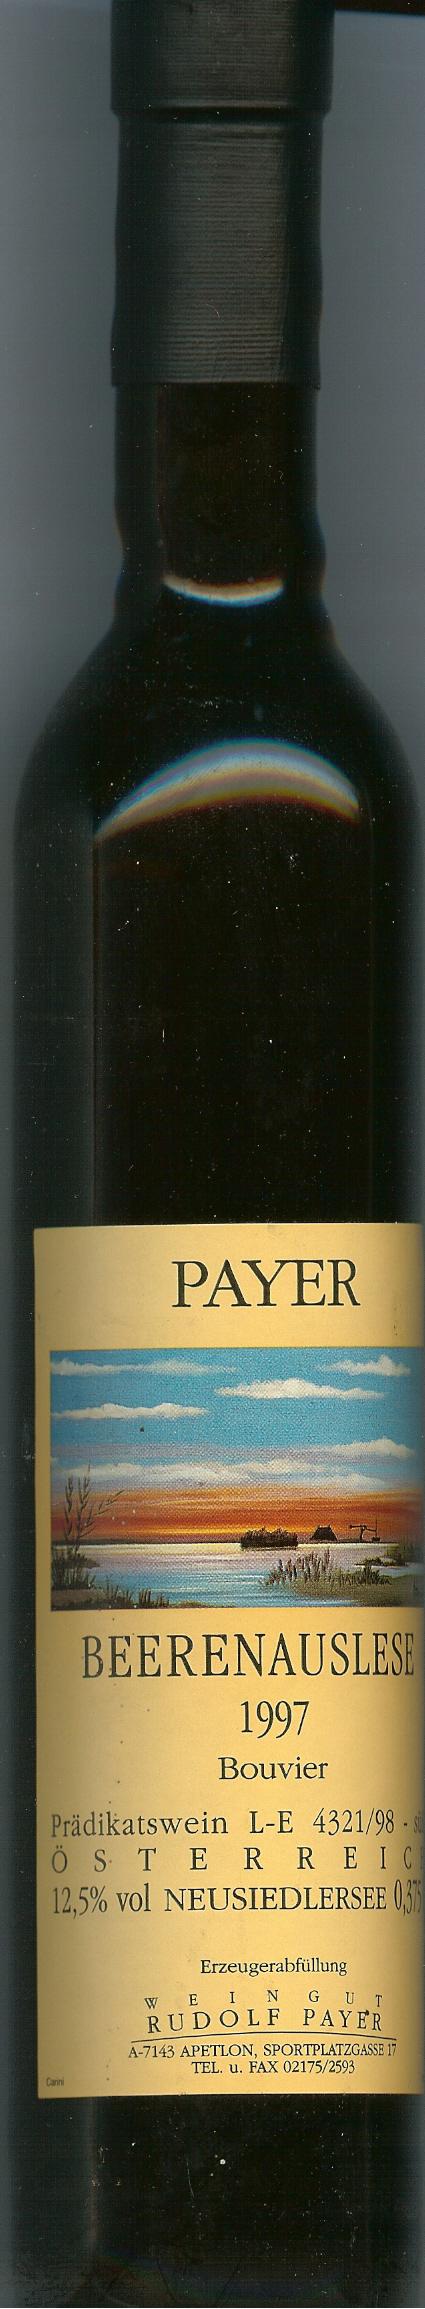 Autriche: Payer, beerenauslese  12,5° 1997 37,5Cl